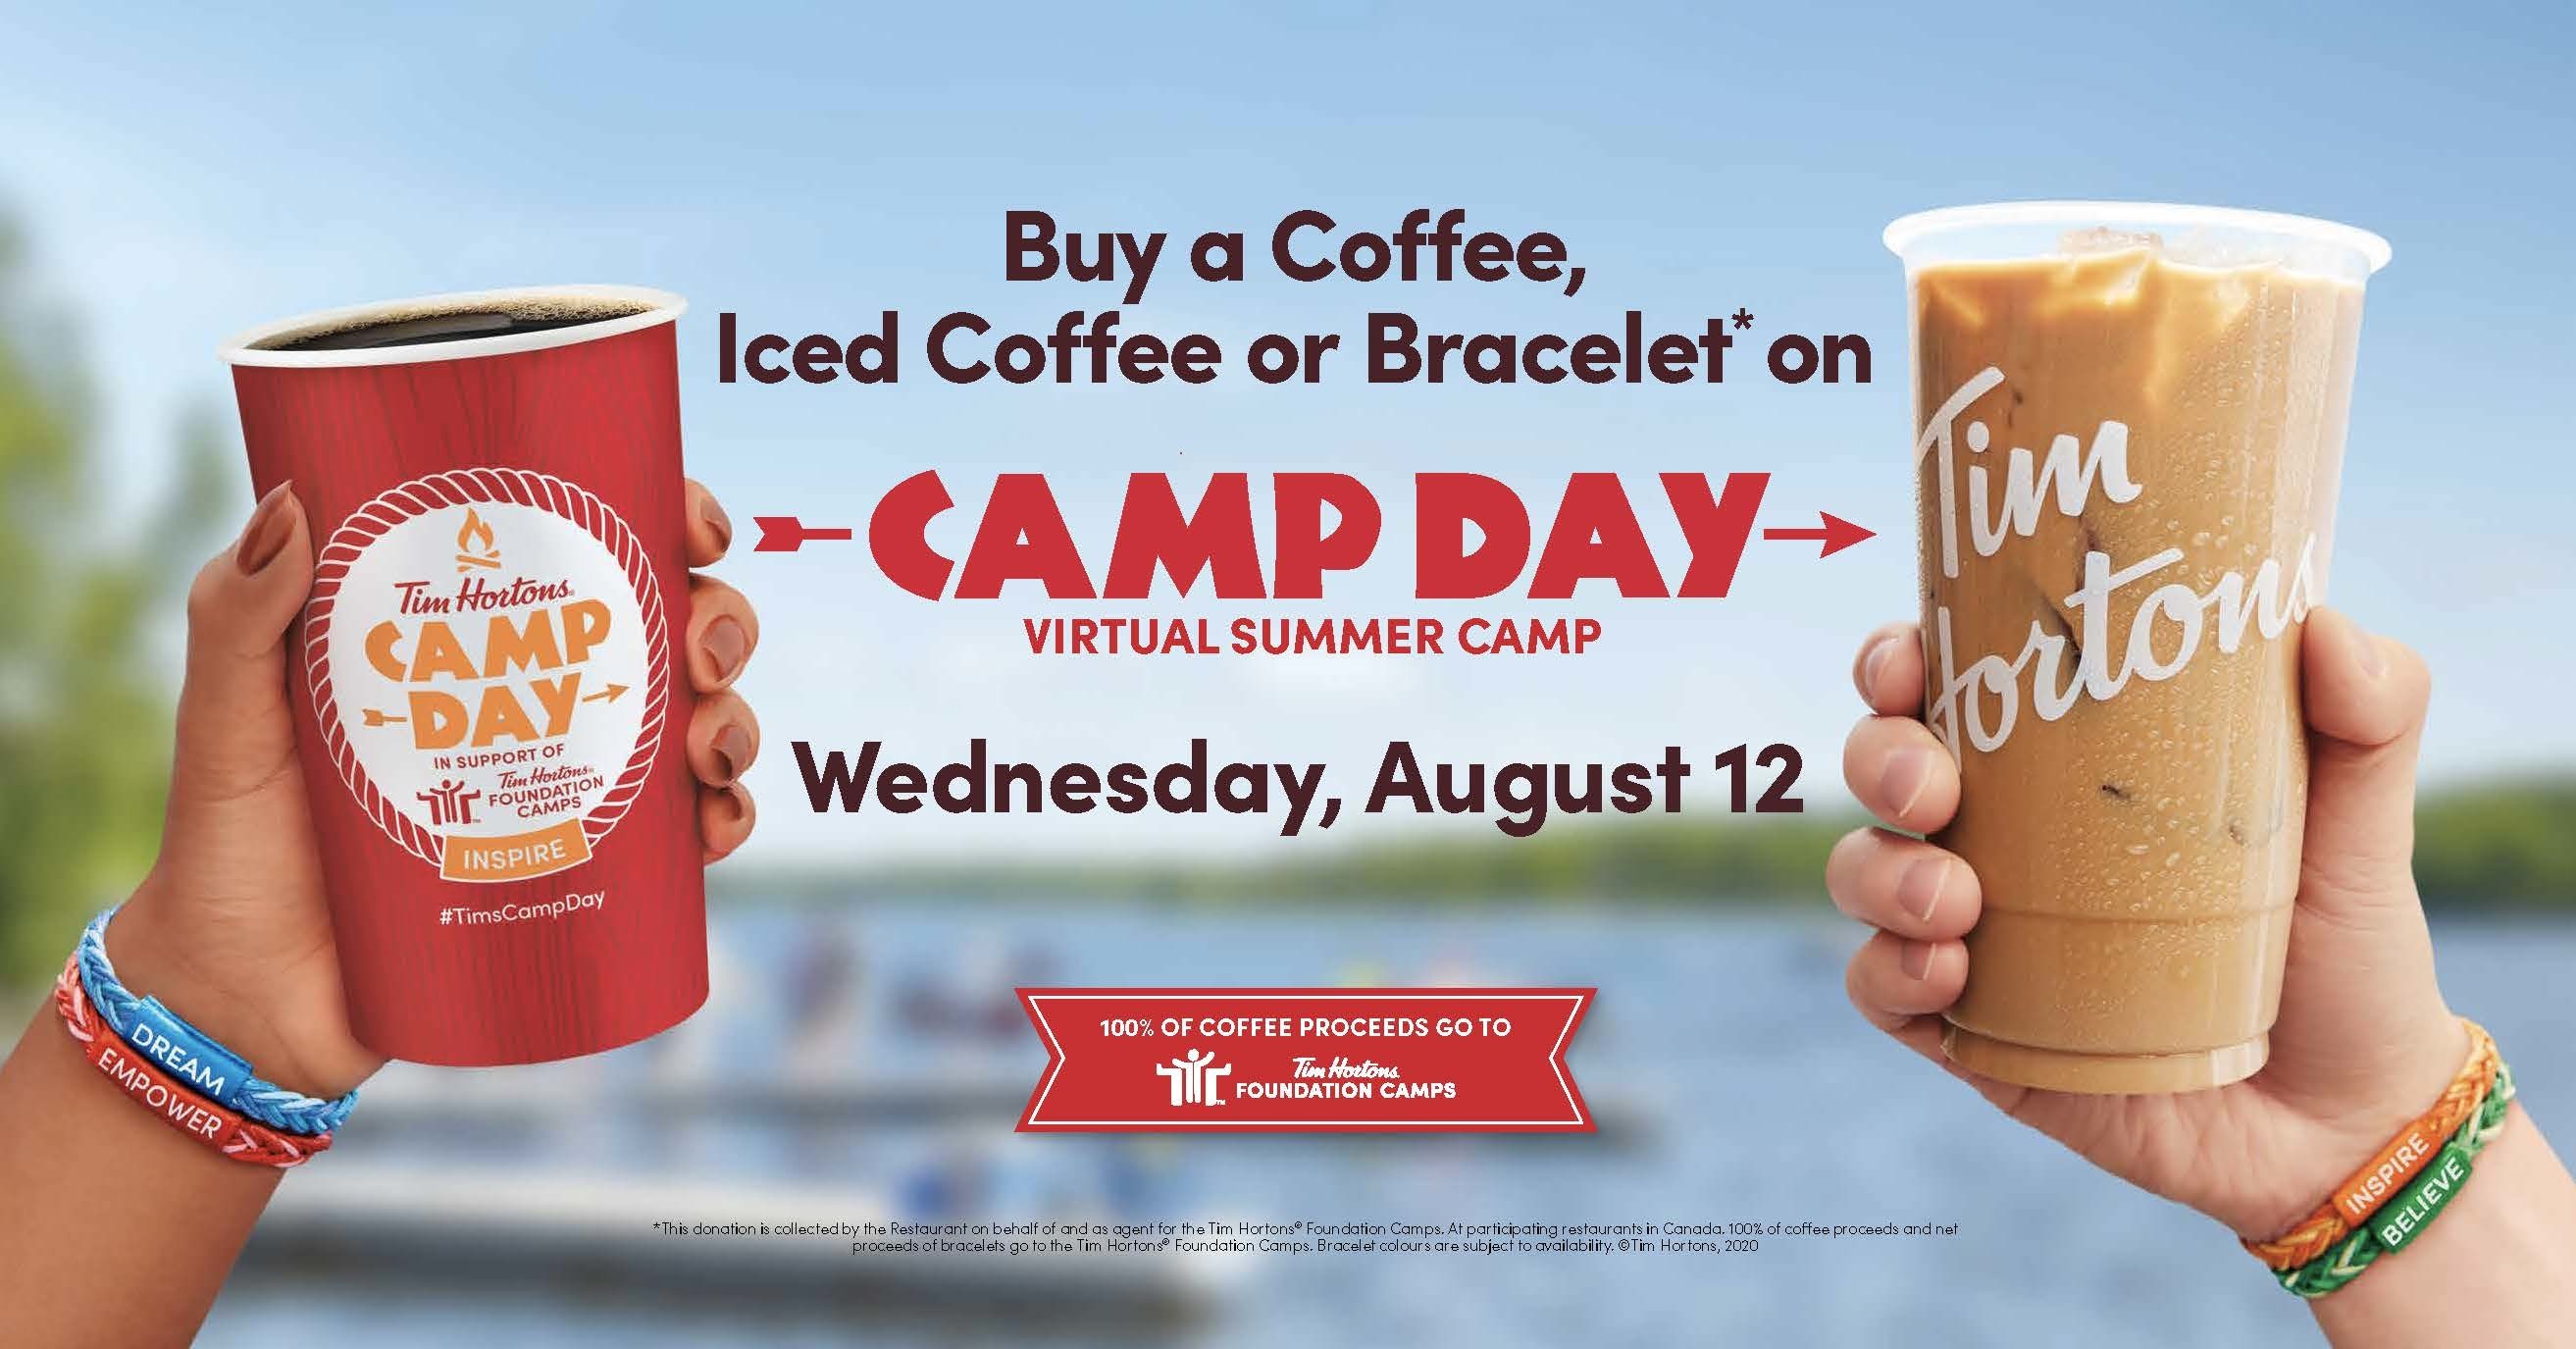 Hortons® announces its annual Day coming on August 12, supporting virtual Tims eCamp this year